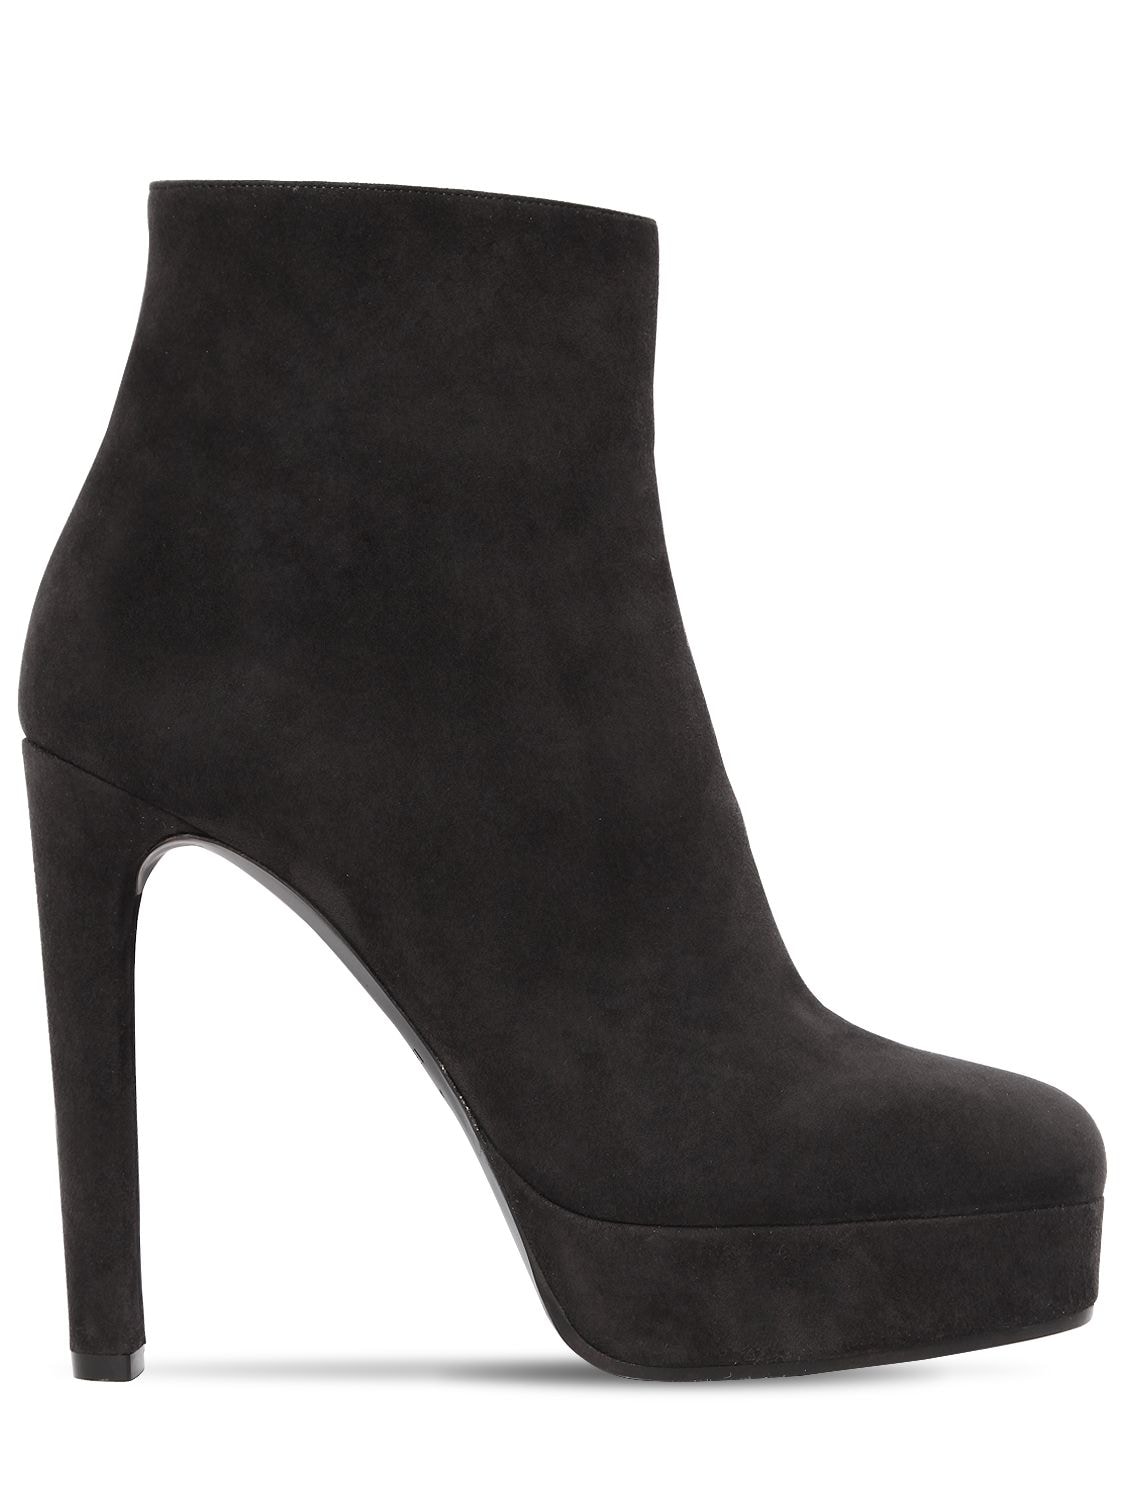 CASADEI 120MM SUEDE ANKLE BOOTS,68IAIM013-MDQZ0